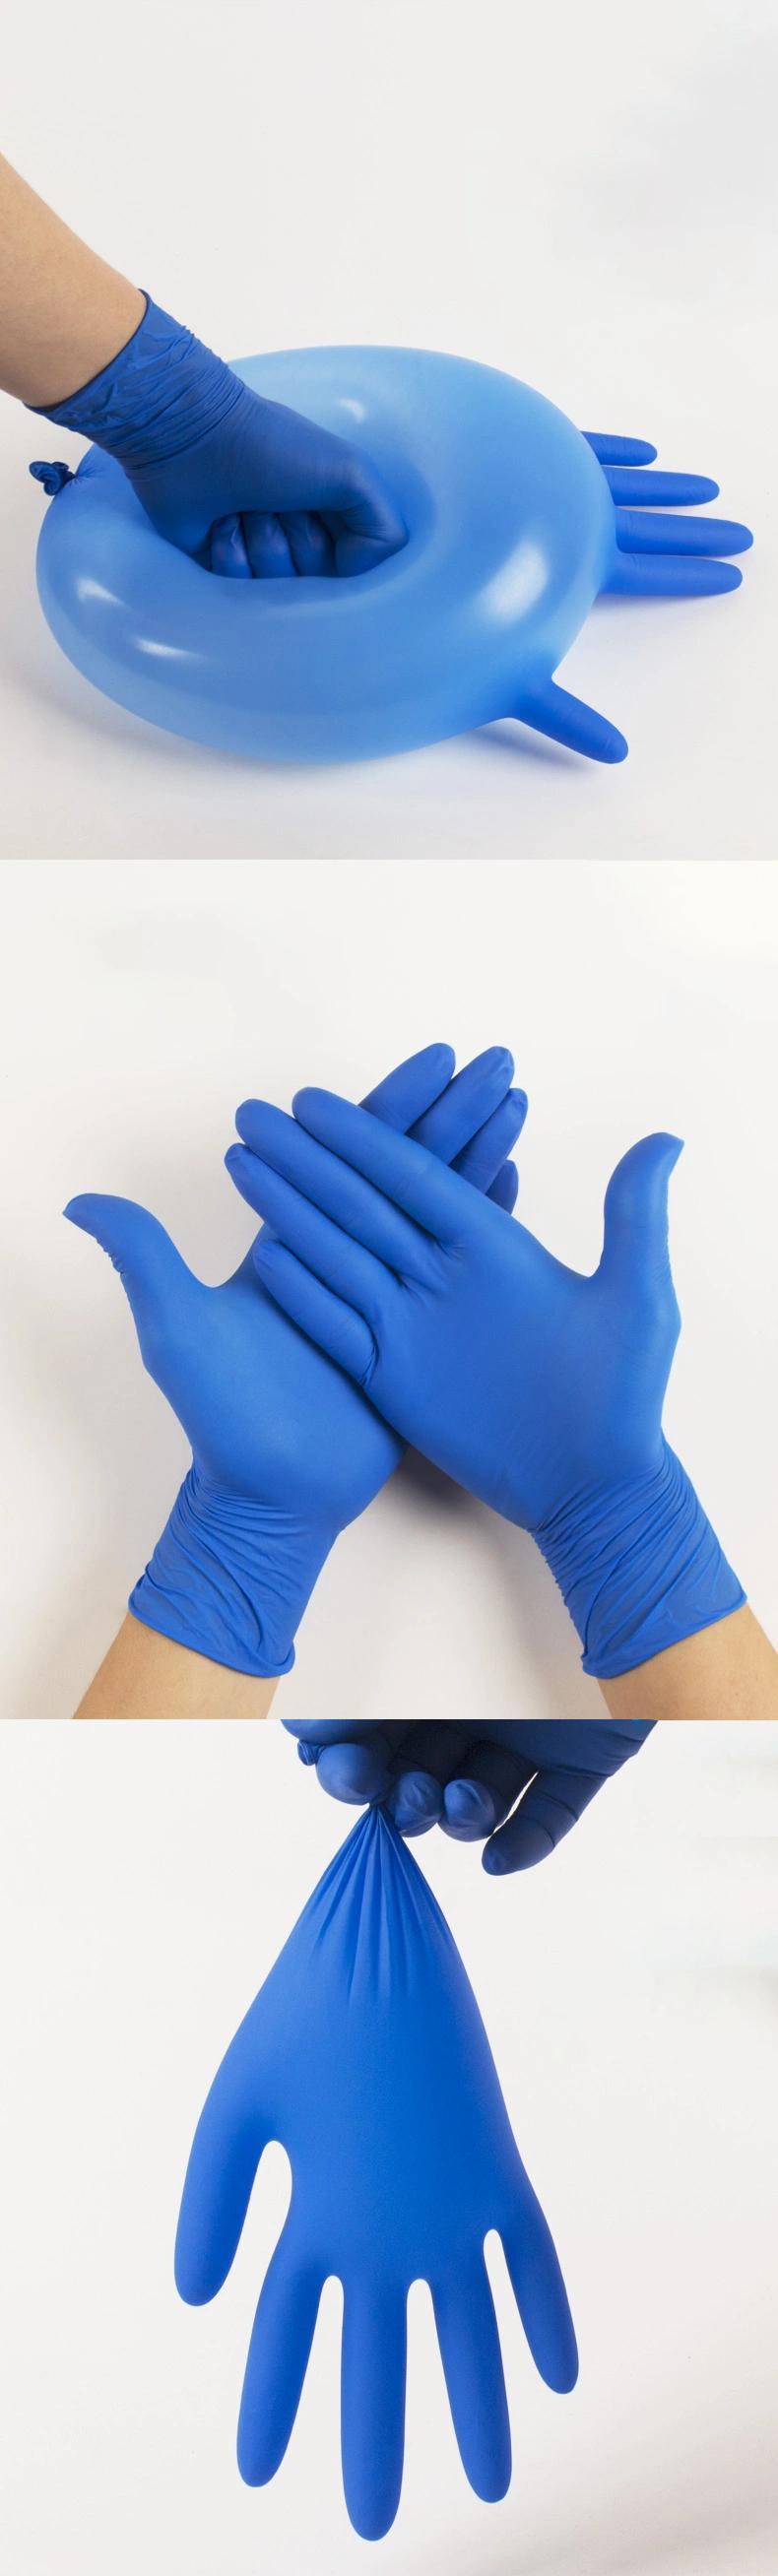 Blue Powder Free Disposable Nitrile Exam Gloves Manufacturers China